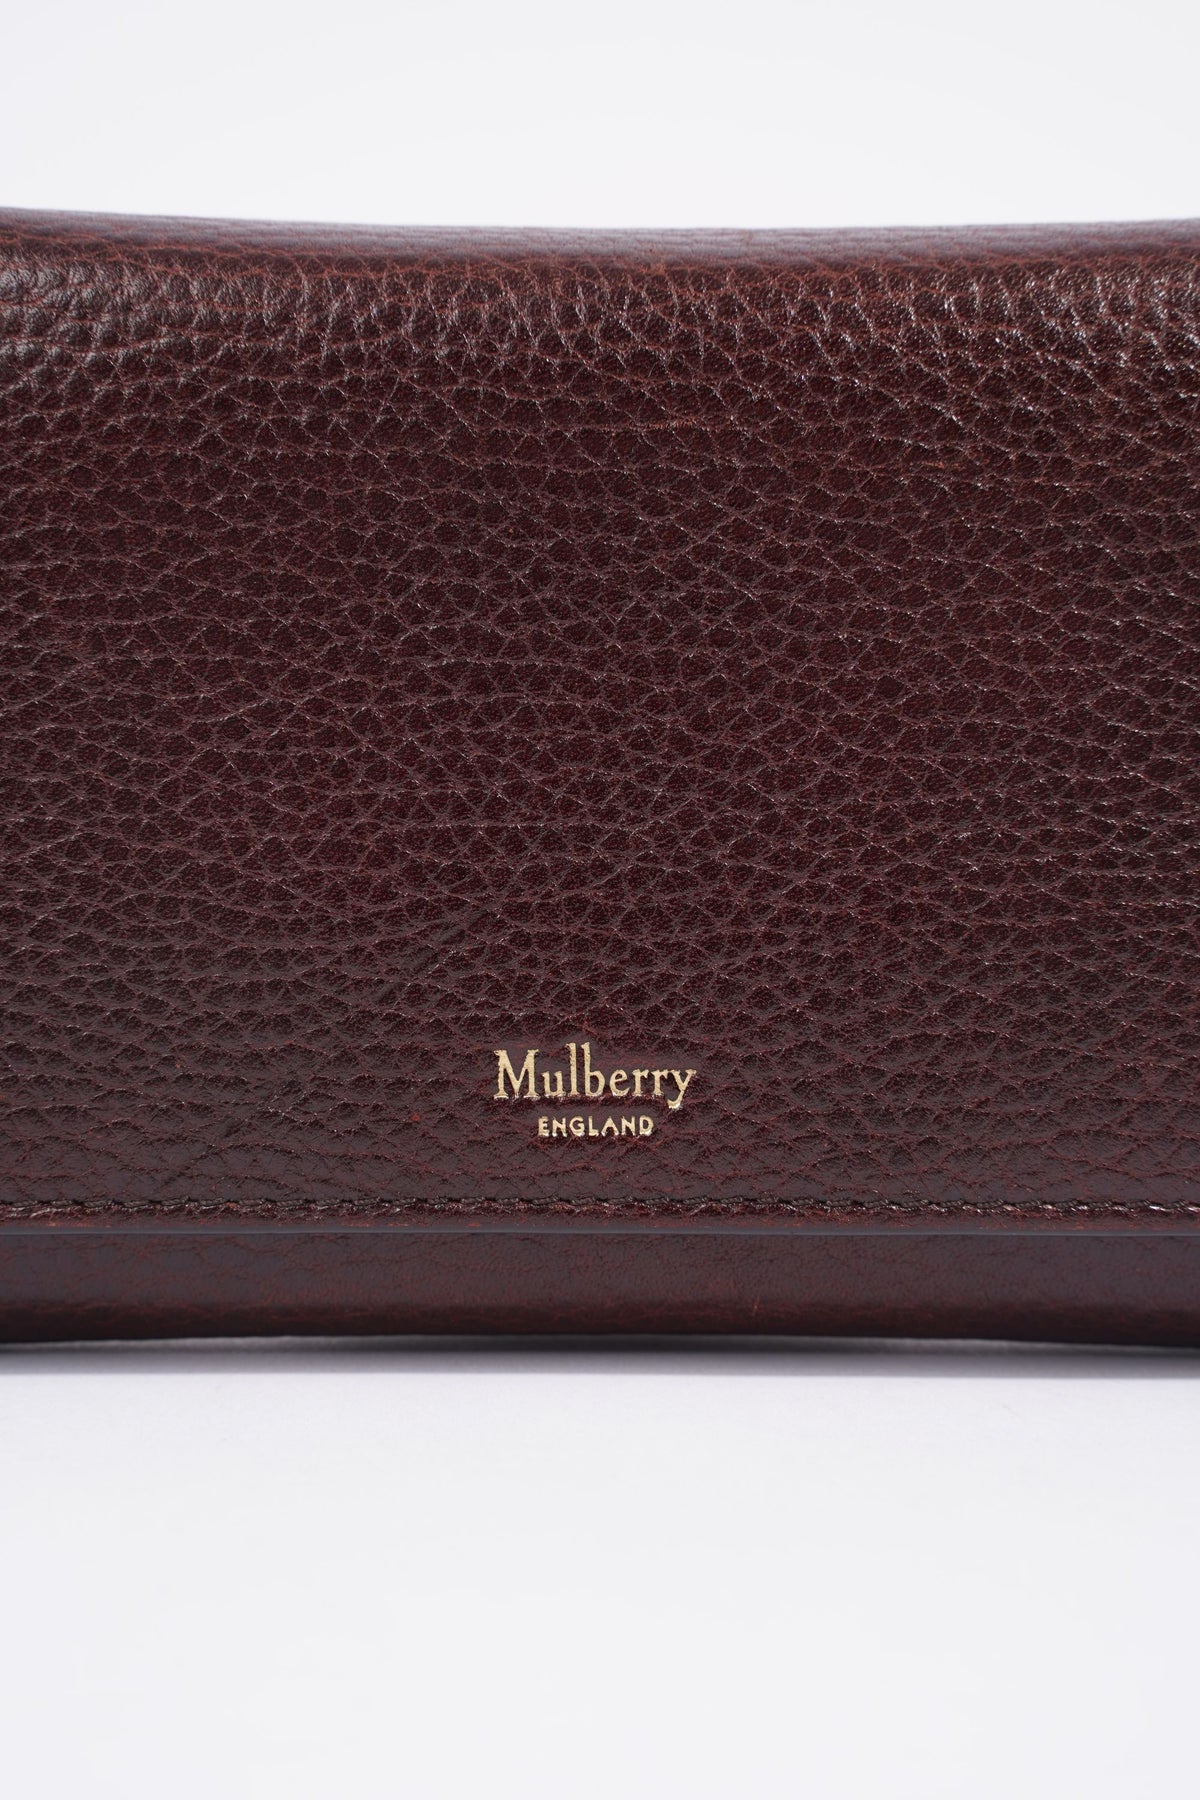 Mulberry Black Leather Chain Coin Purse Mulberry | TLC